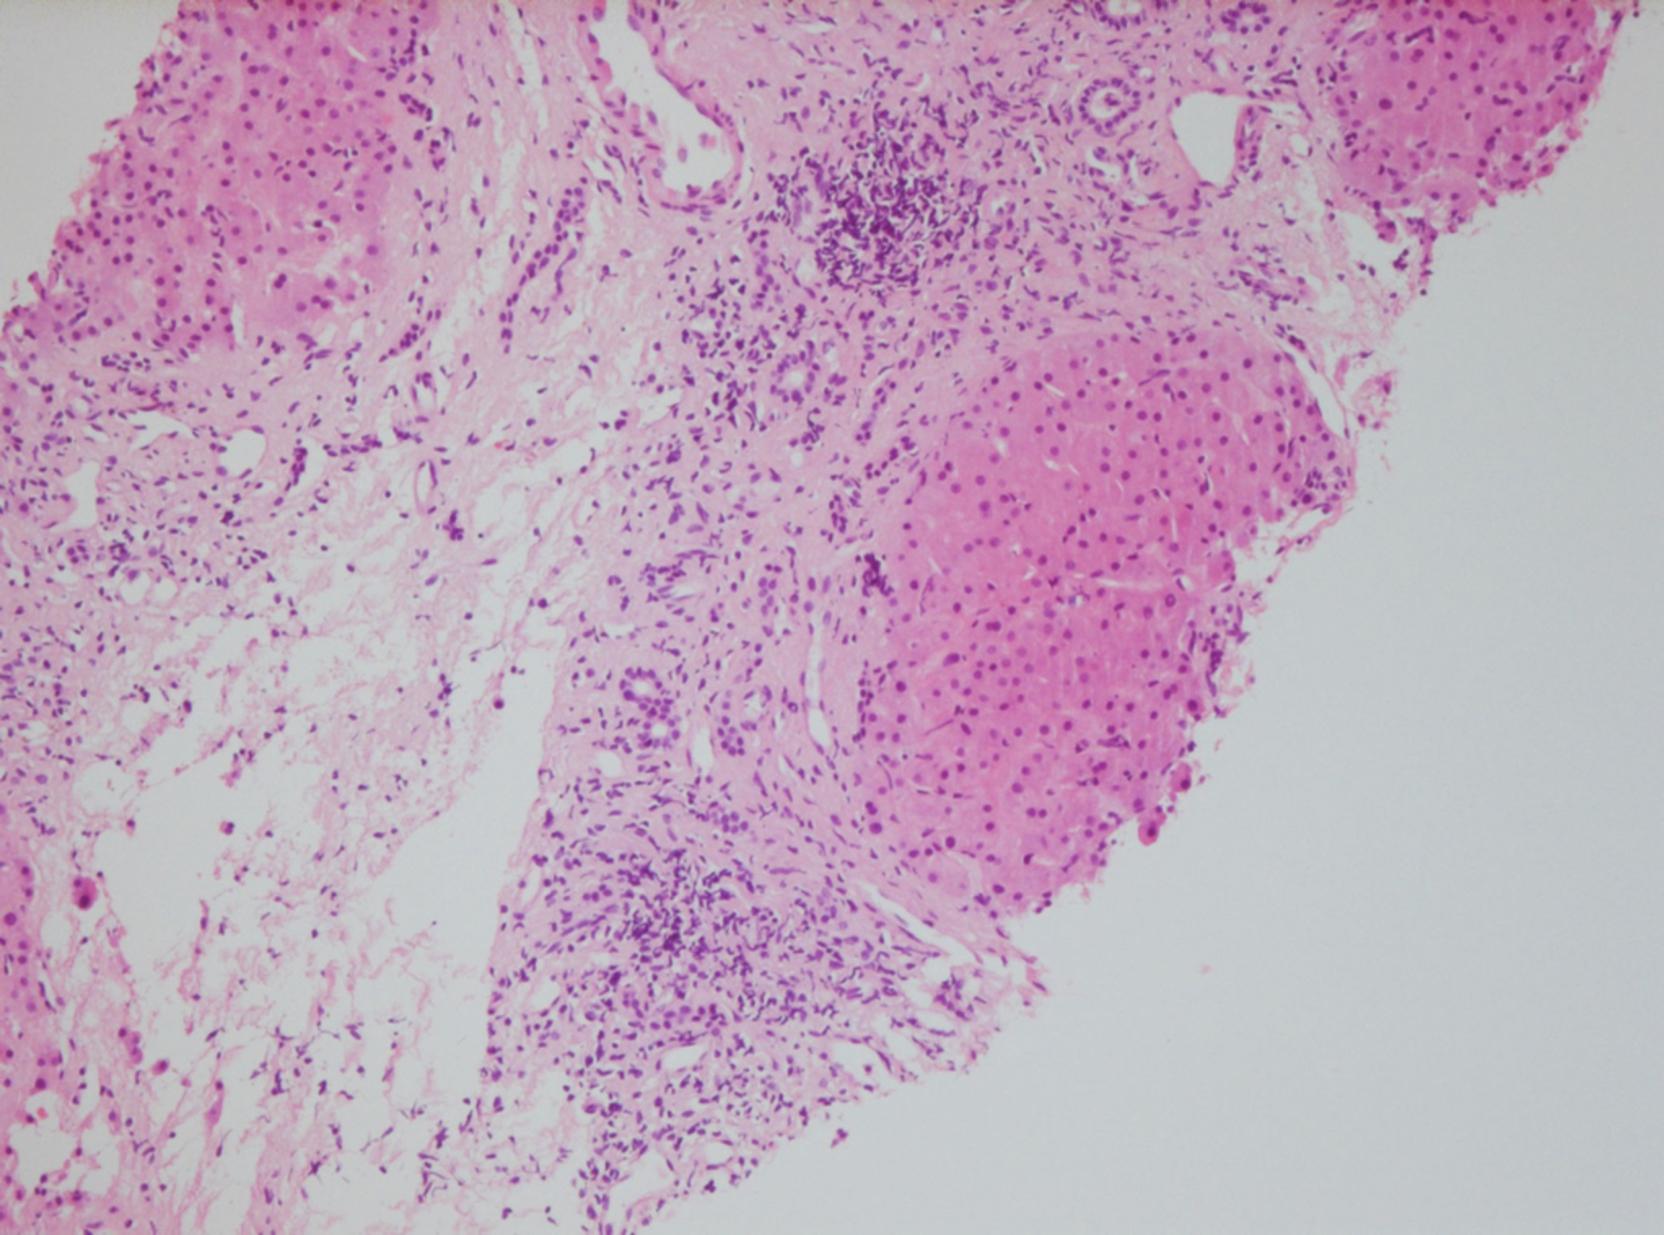 Fig. 44.5, Patient 2: Protocol biopsy 6 years after pediatric liver transplantation (hematoxylin and eosin staining, 100 × magnification) showing advanced periportal fibrosis (liver allograft fibrosis score, 5/9) and mild to moderate portal inflammation.